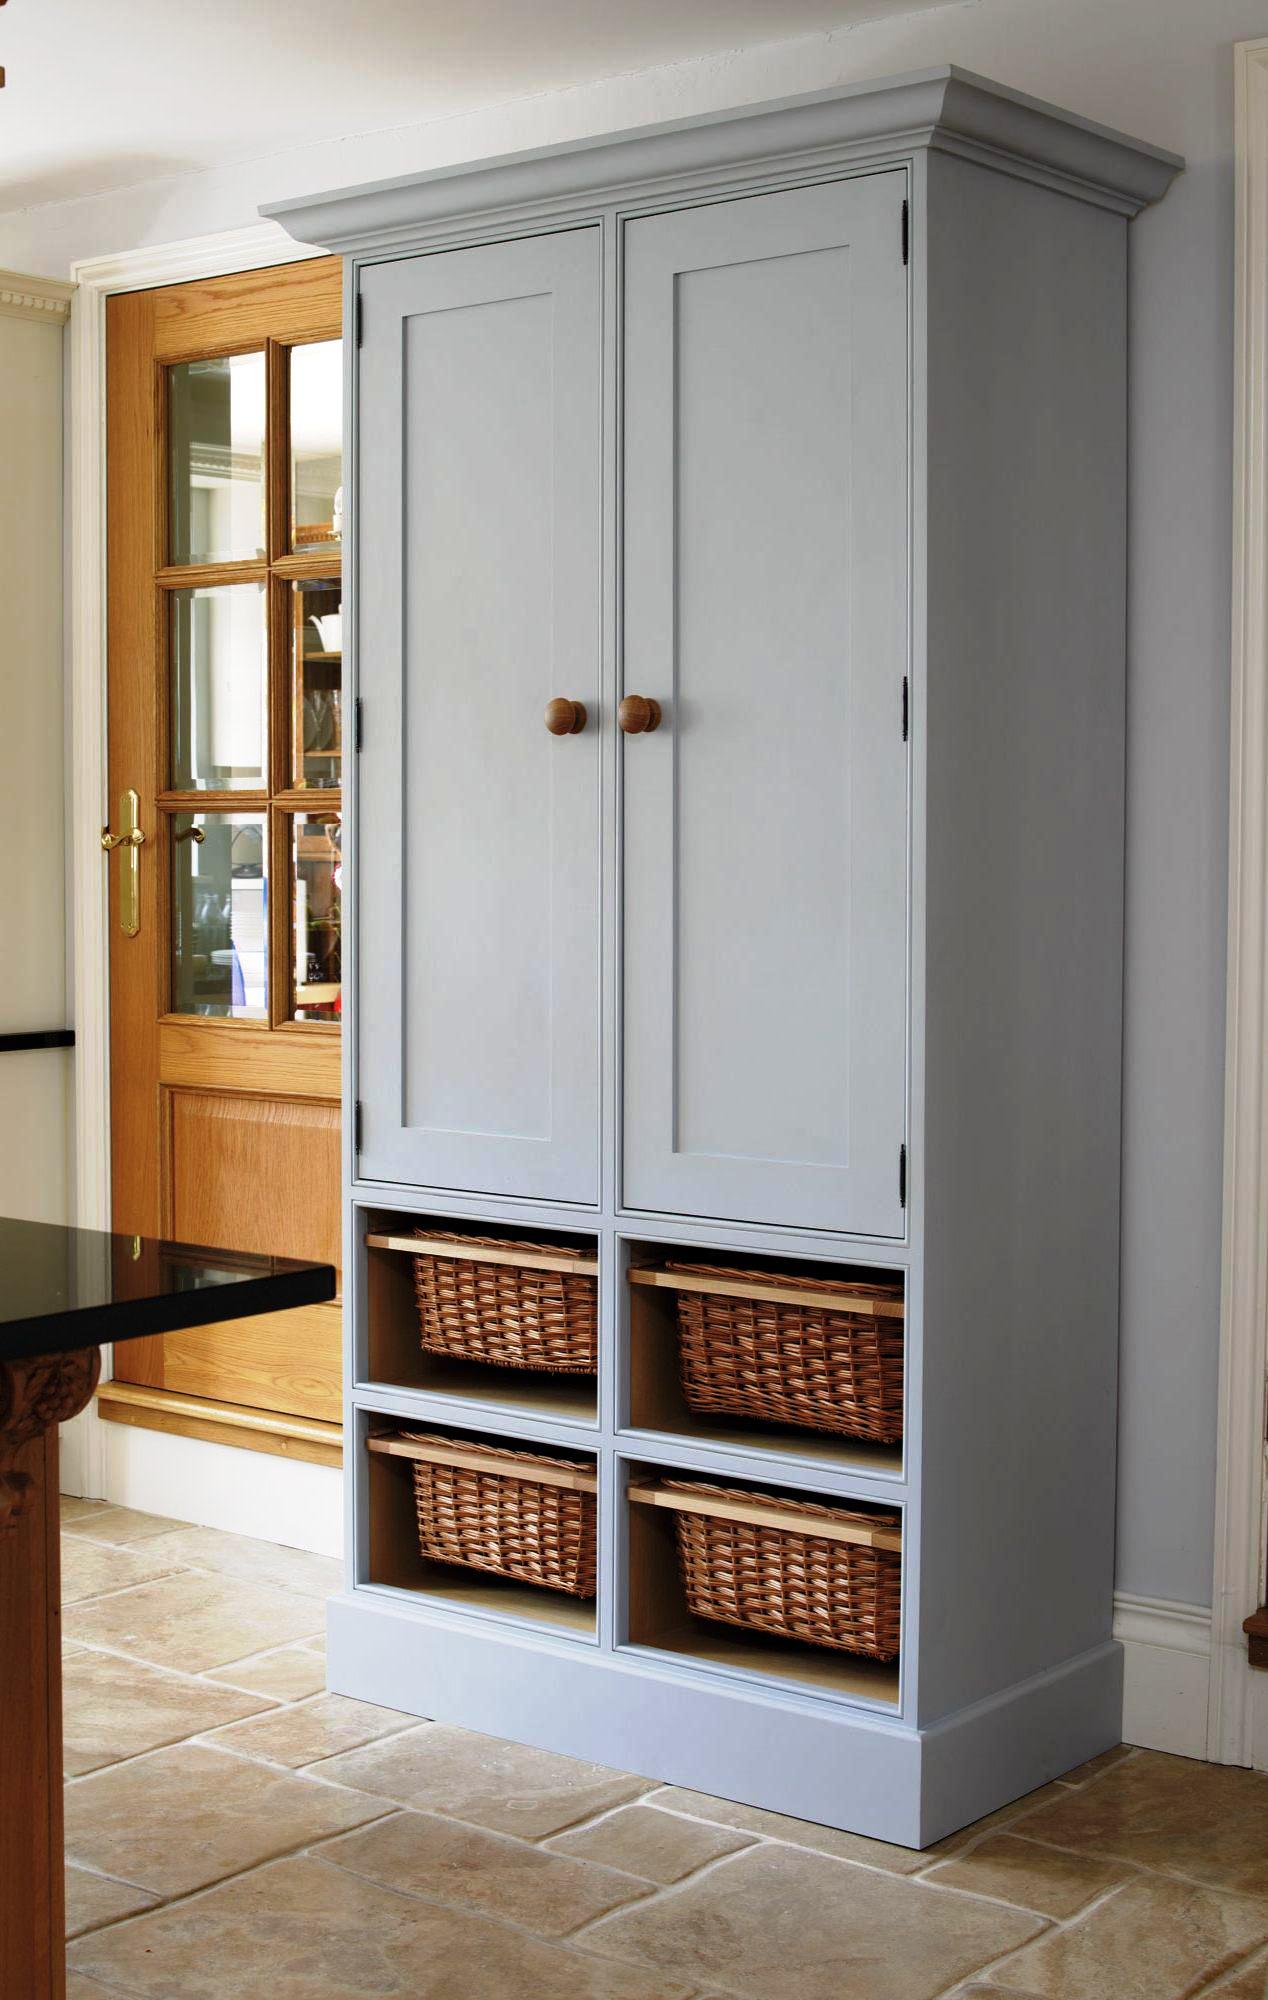 Appealing Freestanding Pantry Cabinet